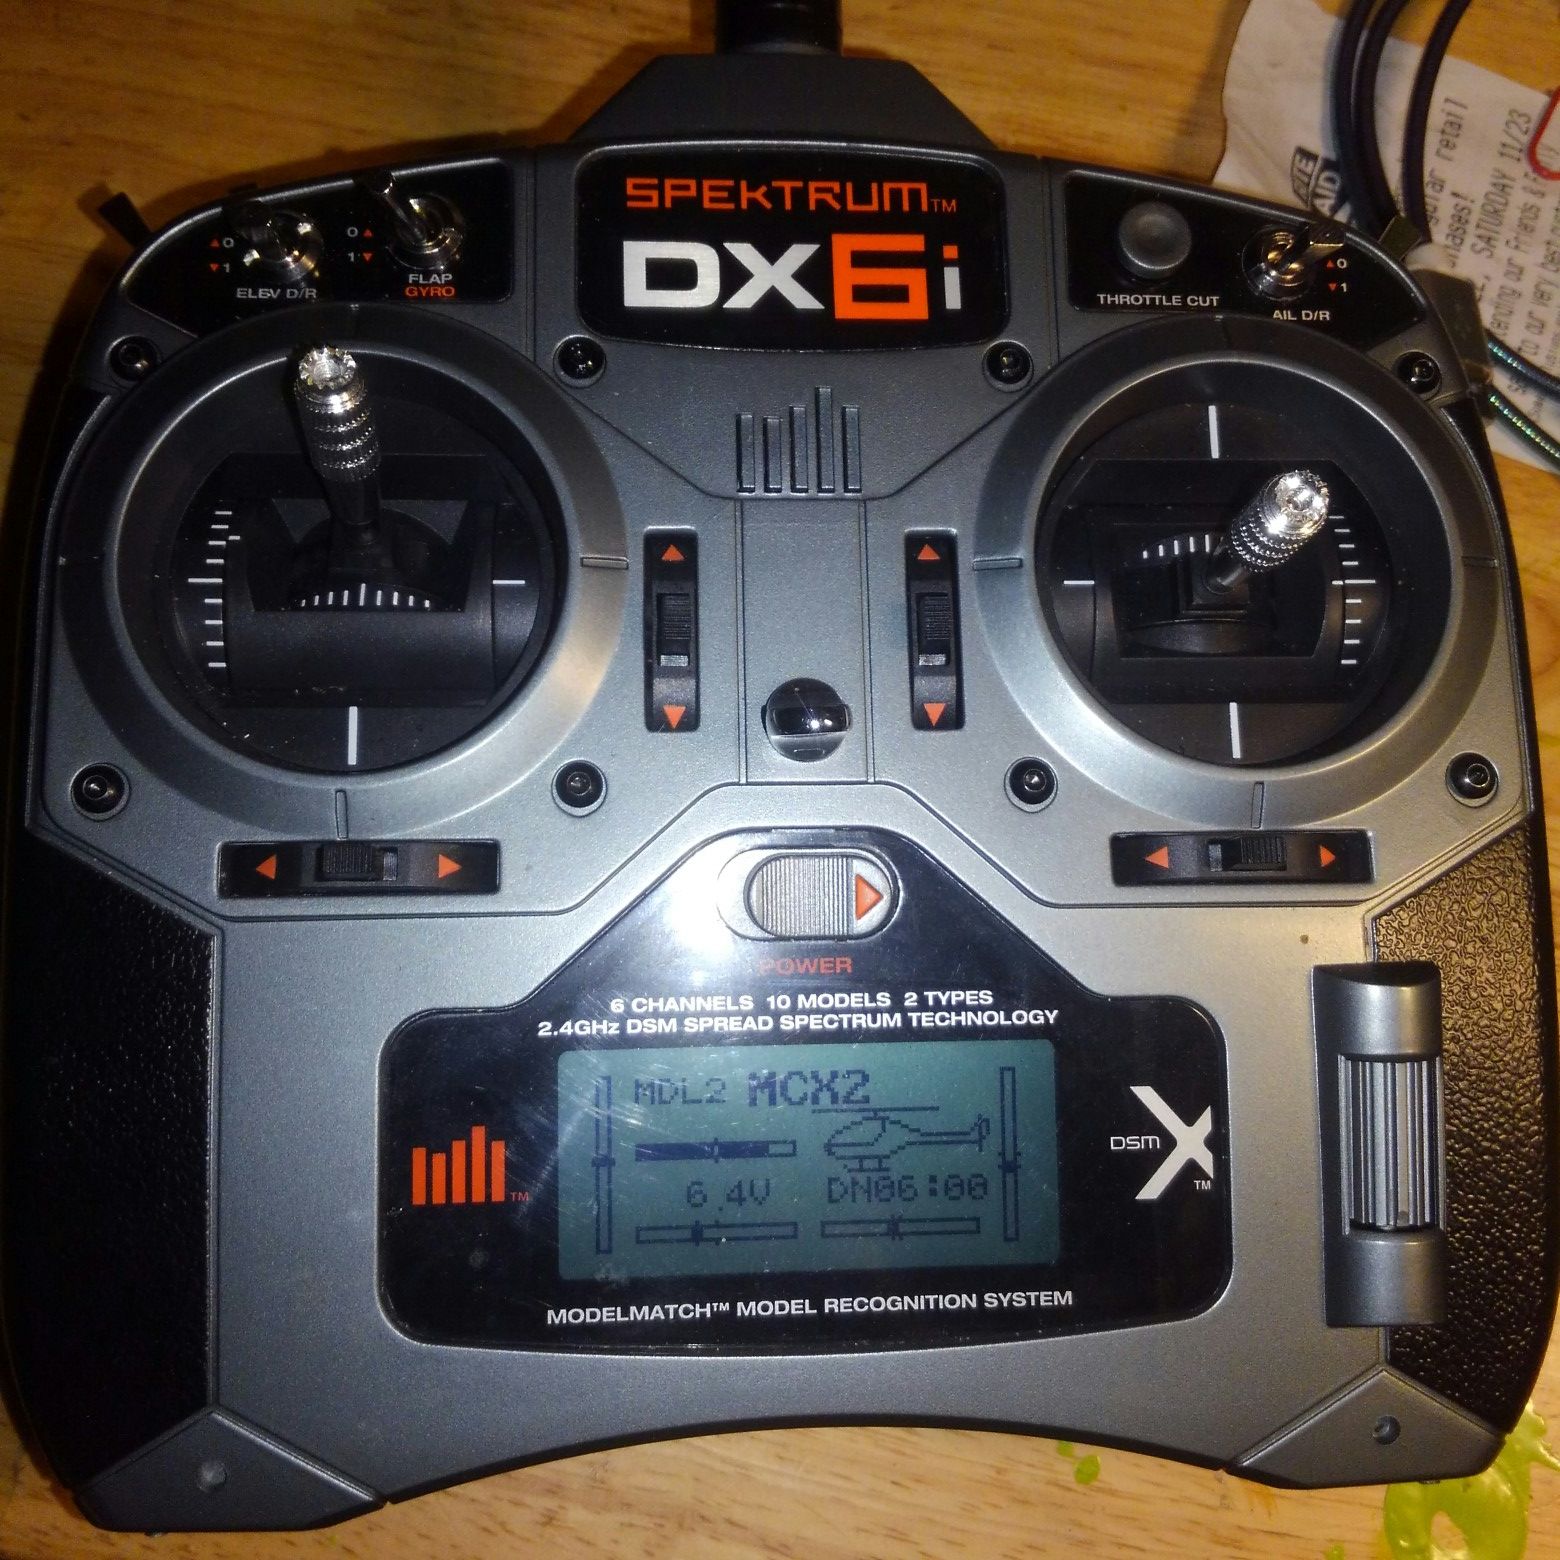 Spektrum DX6i Controller for Drones, r/c planes, & helecopters